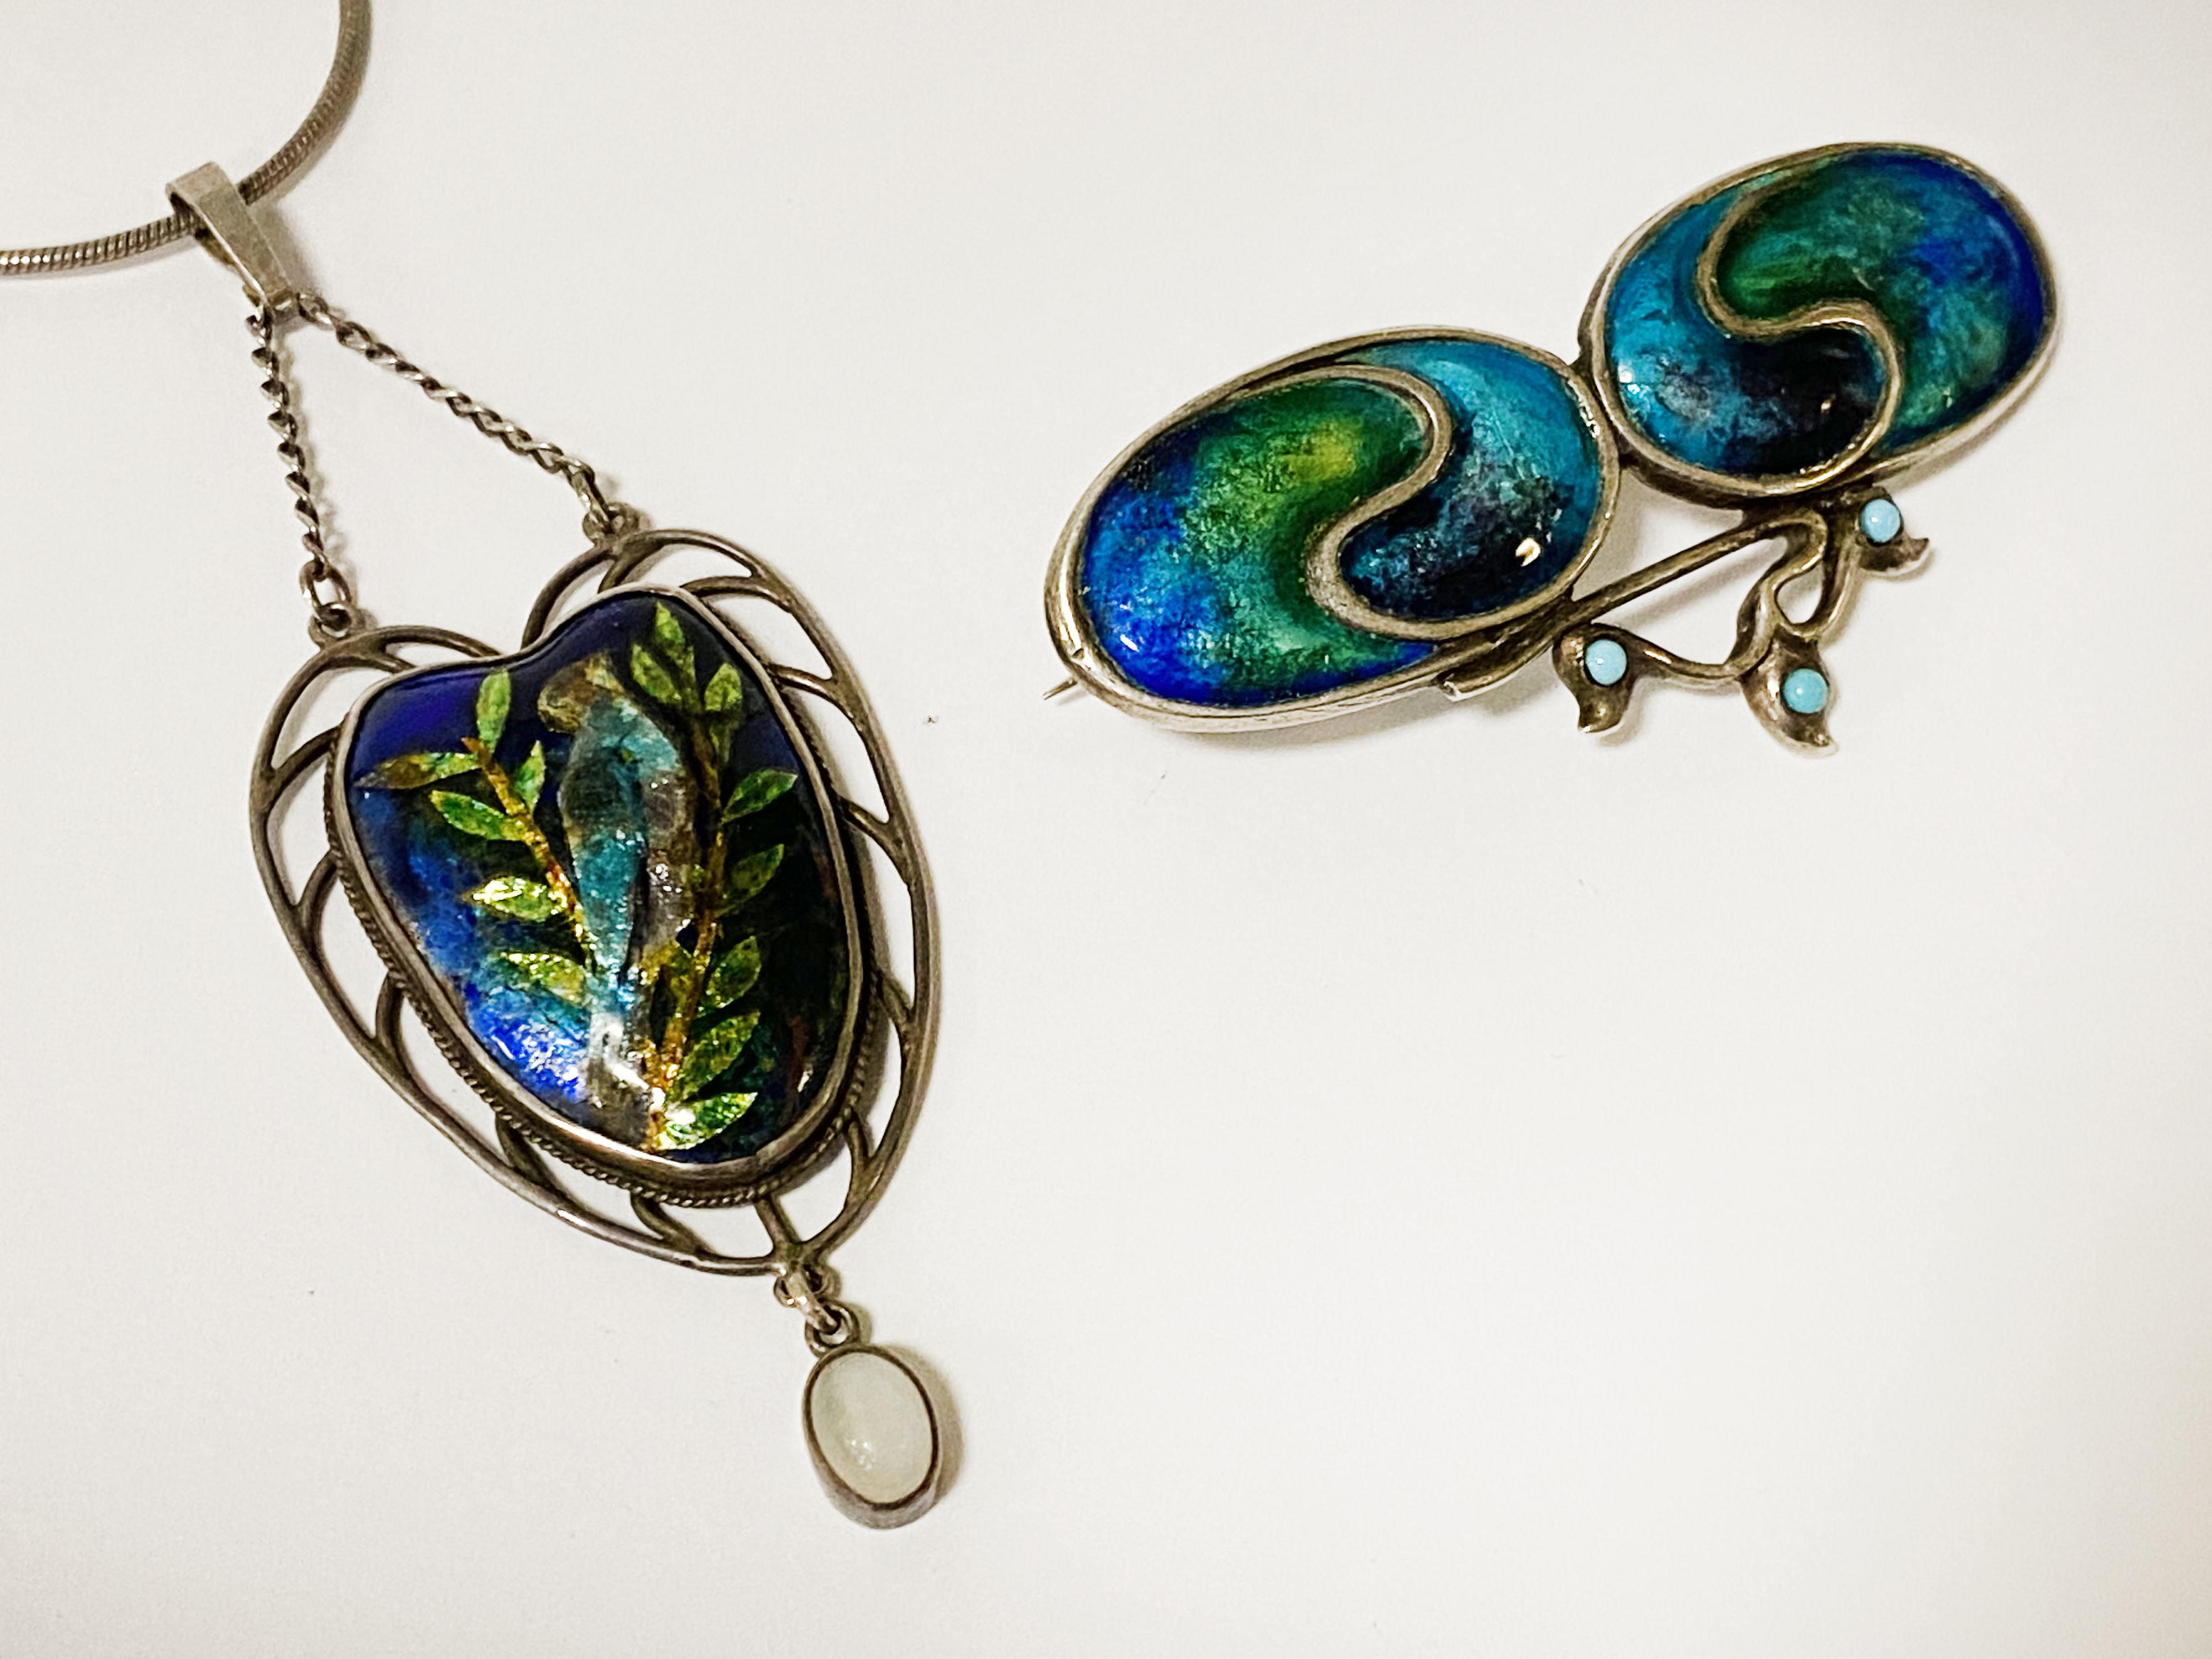 ARTS & CRAFTS LIBERTY STYLE SILVER & ENAMEL BROOCH WITH SILVER PENDANT & CHAIN - Image 2 of 2